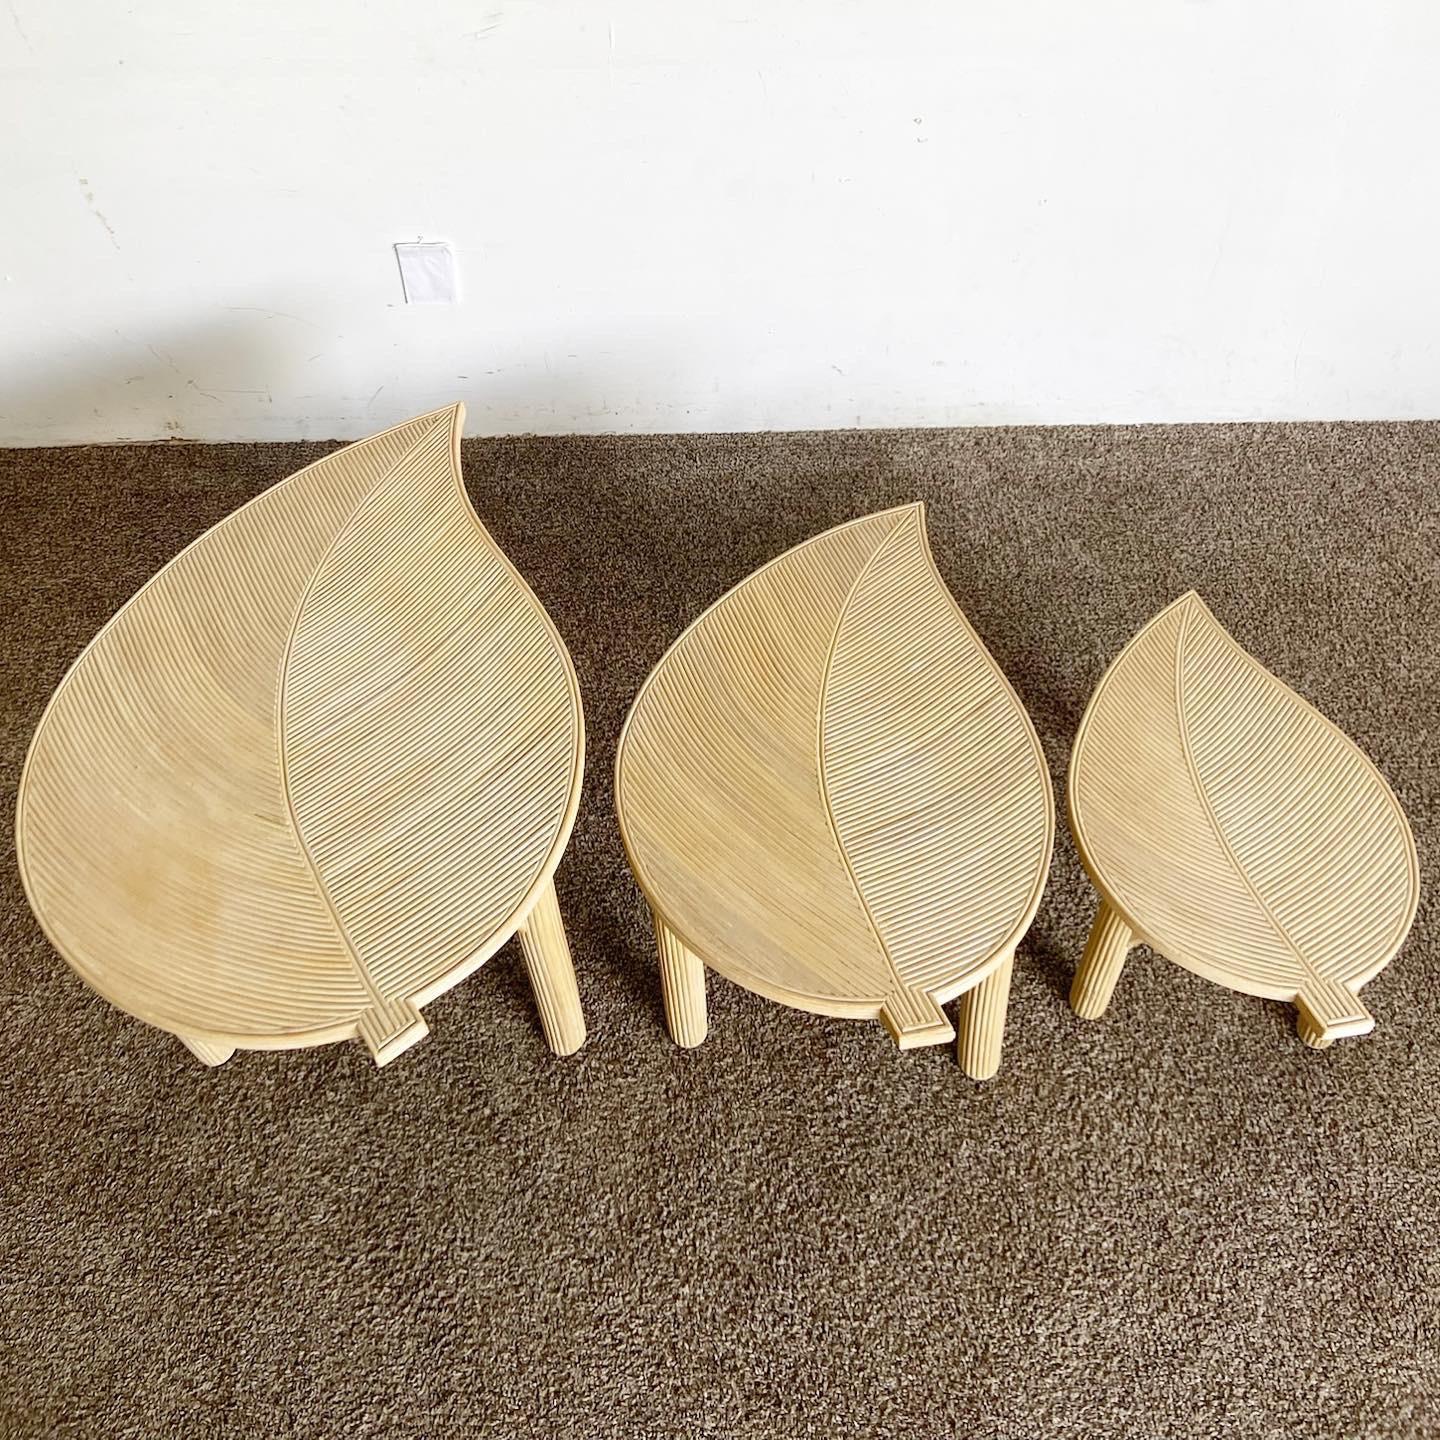 Boho Chic Pencil Reed Leaf Nesting Tables - Set of 3 In Good Condition For Sale In Delray Beach, FL